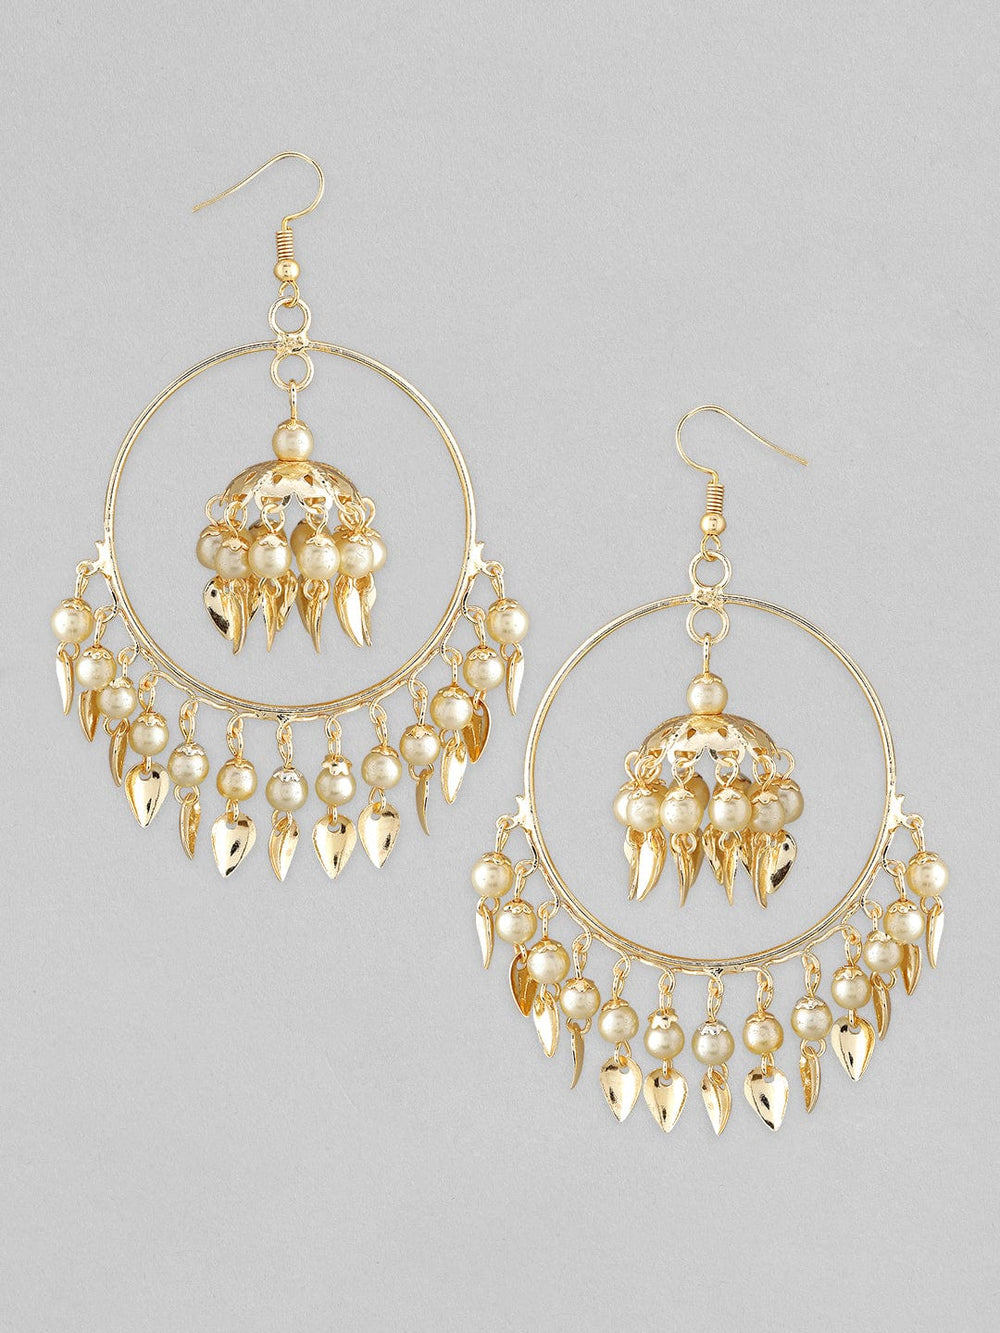 Rubans Gold Plated Chandbali With Jhumka, Beads And Pearls Design. Earrings